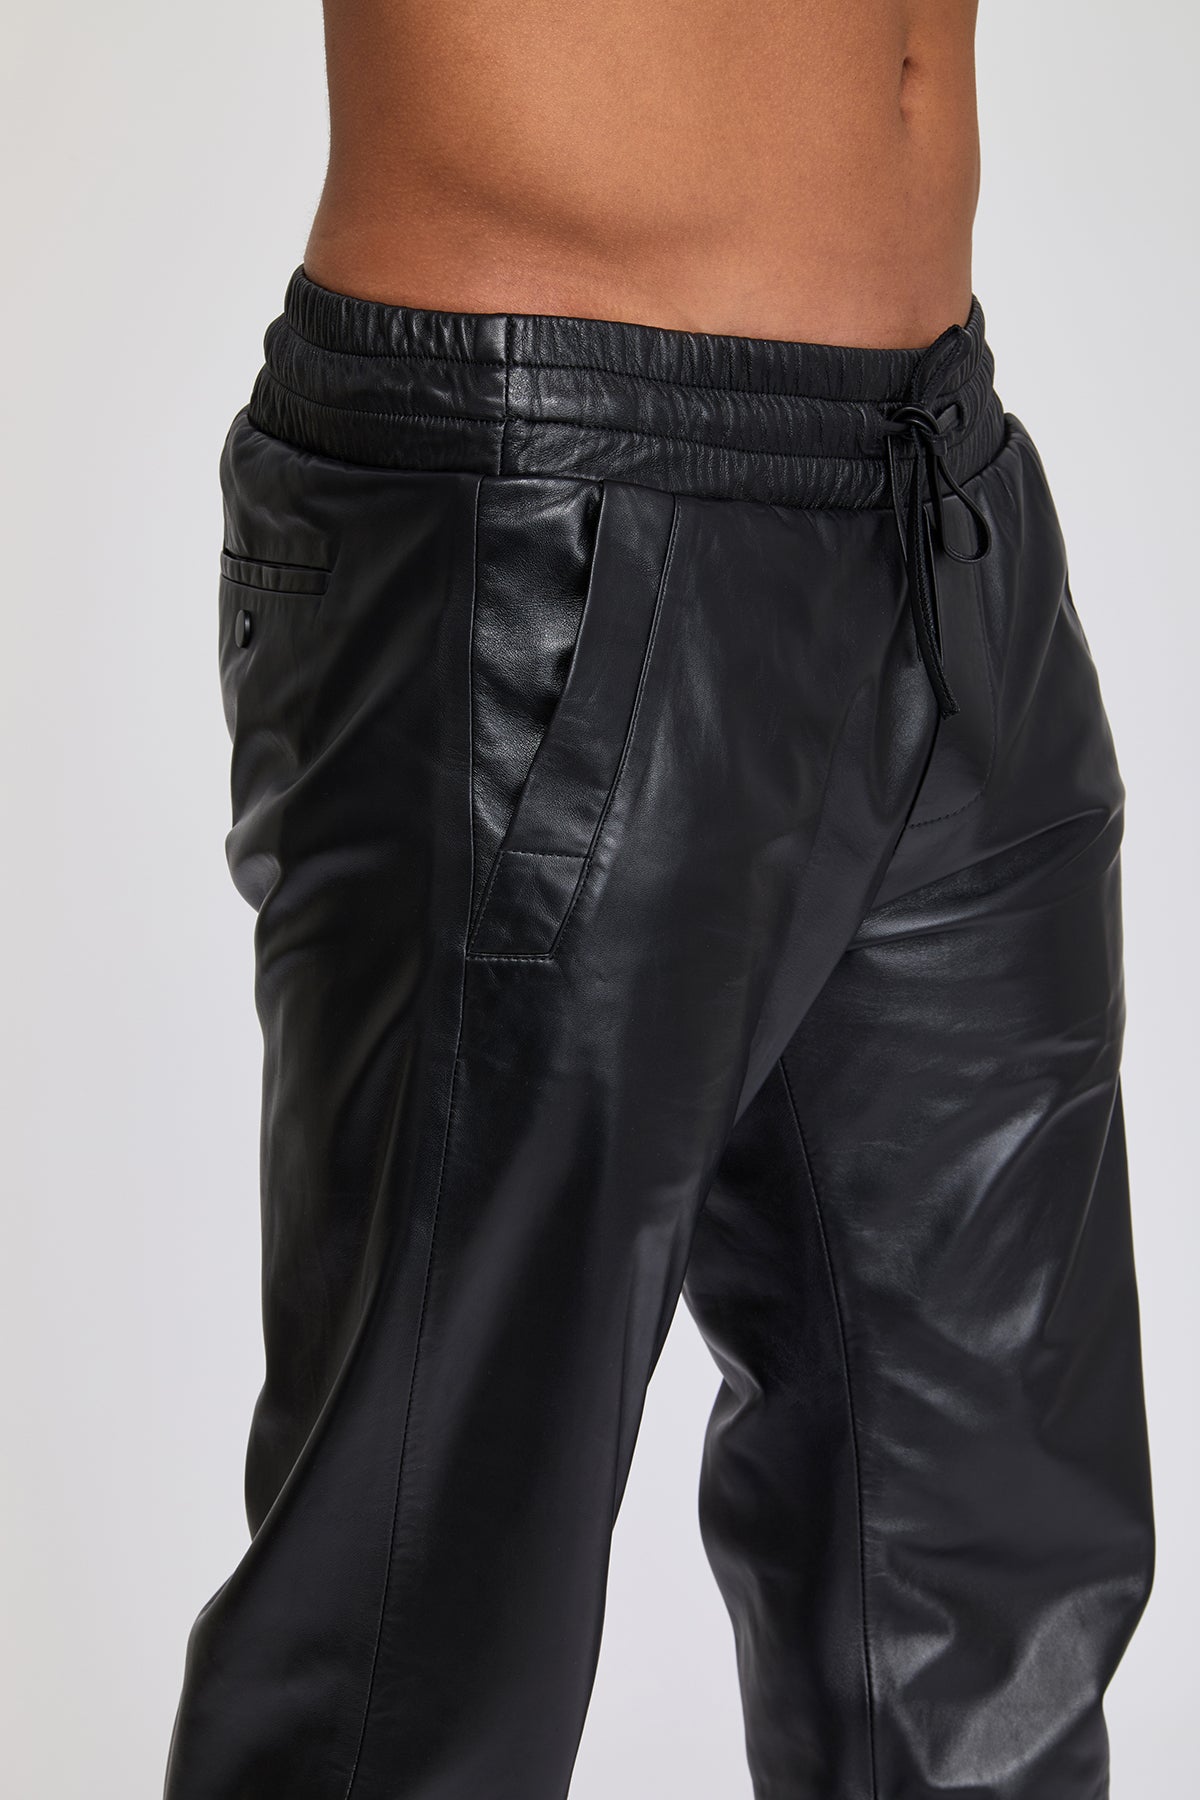 Men's leather pants. 100 % real Turkish leather. Lambskin. Soft. Great quality. Regular fit. Elastic waistband. Side pockets. Luxurious.